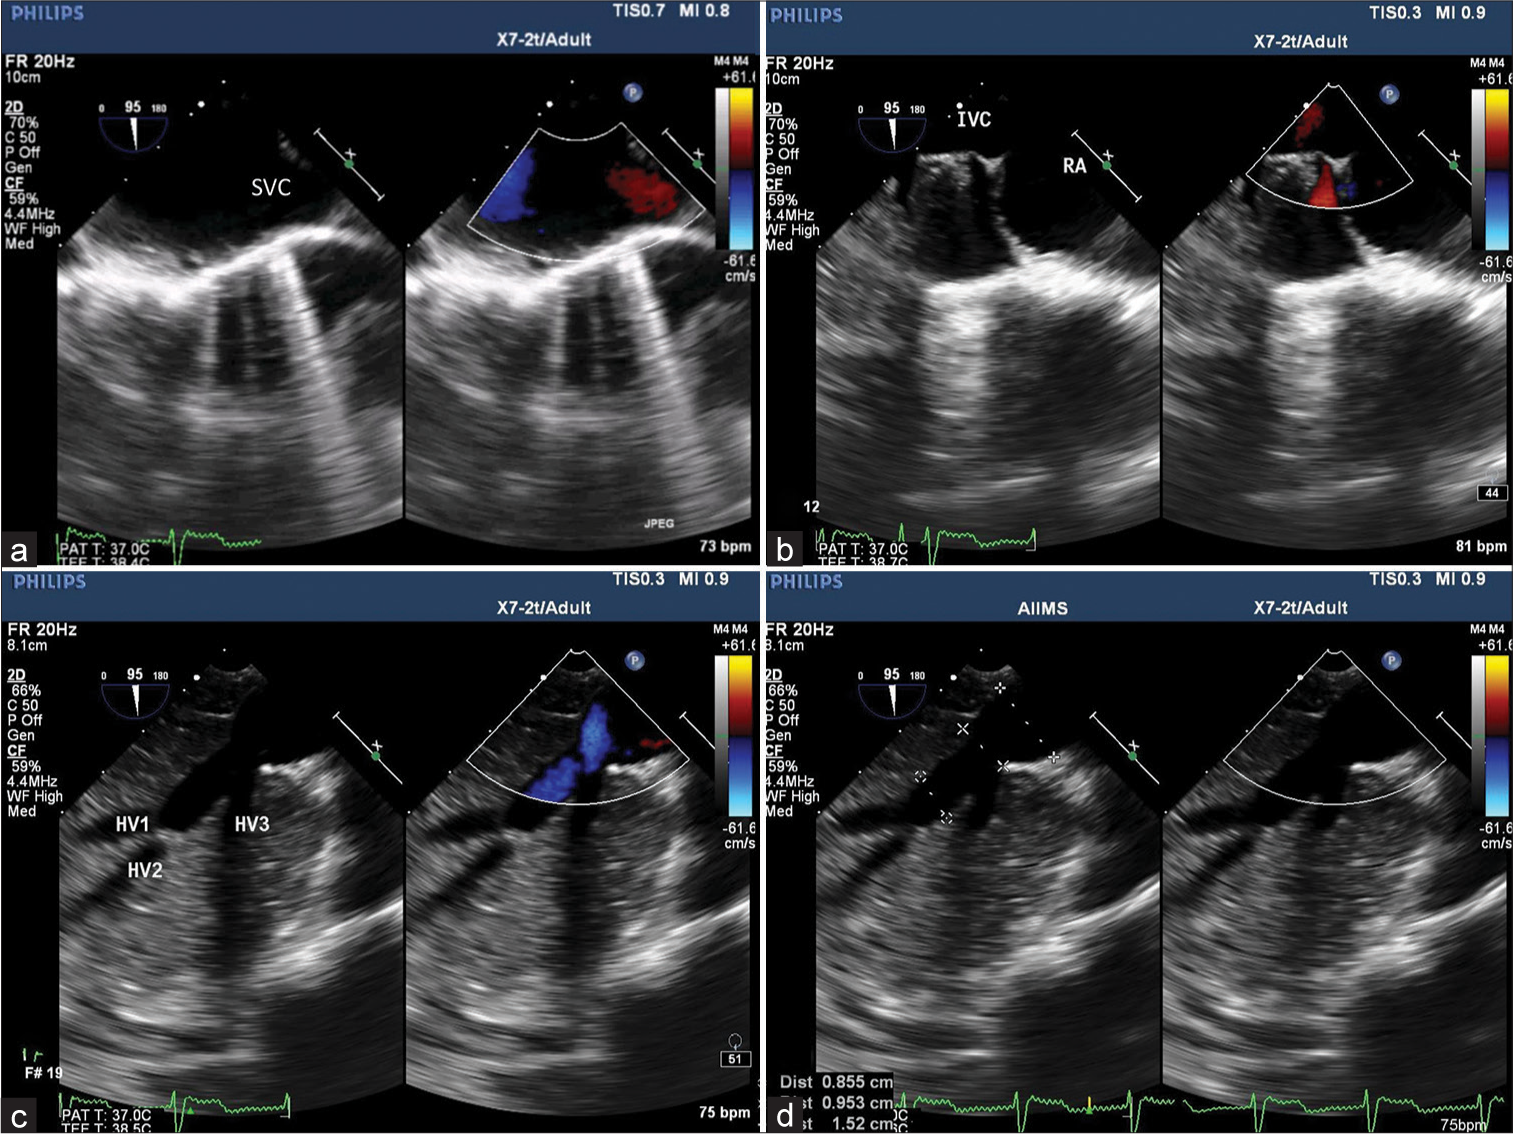 (a) Midesophageal bicaval view with color comparison demonstrating superior vena cava and (b) inferior vena cava (IVC) draining into the right atrium. (c) Transgastric hepatic vein (HV) view confirming 3 HV draining into IVC and (d) HV confluence and IVC measuring 0.9 cm and 1.5 cm, respectively.